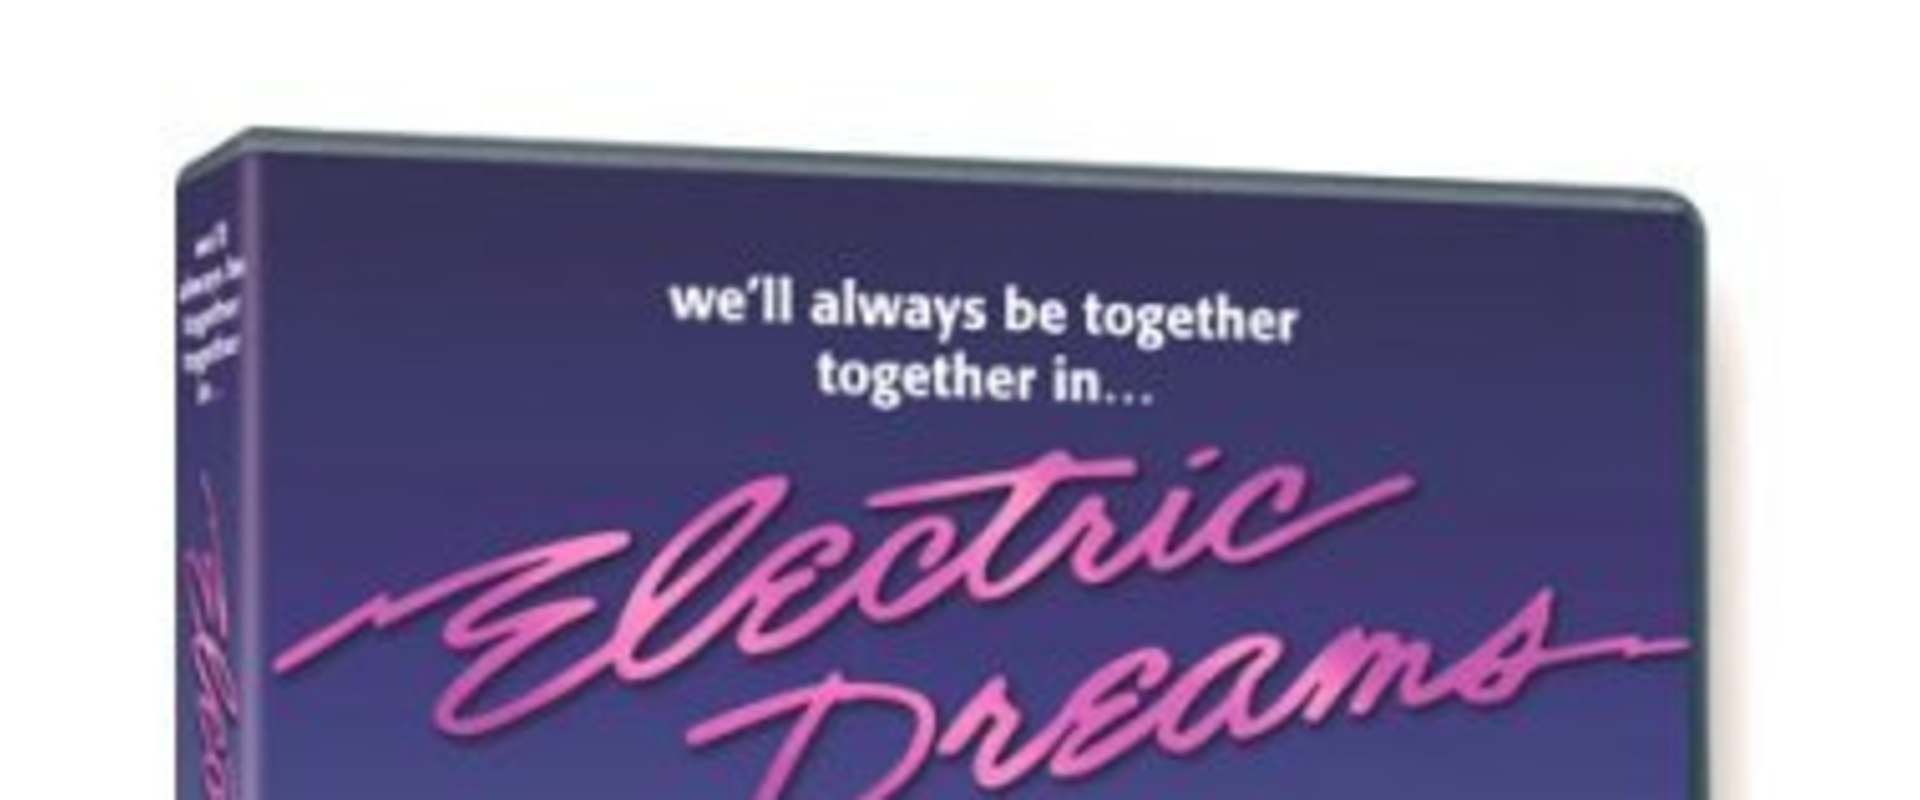 Electric Dreams background 1